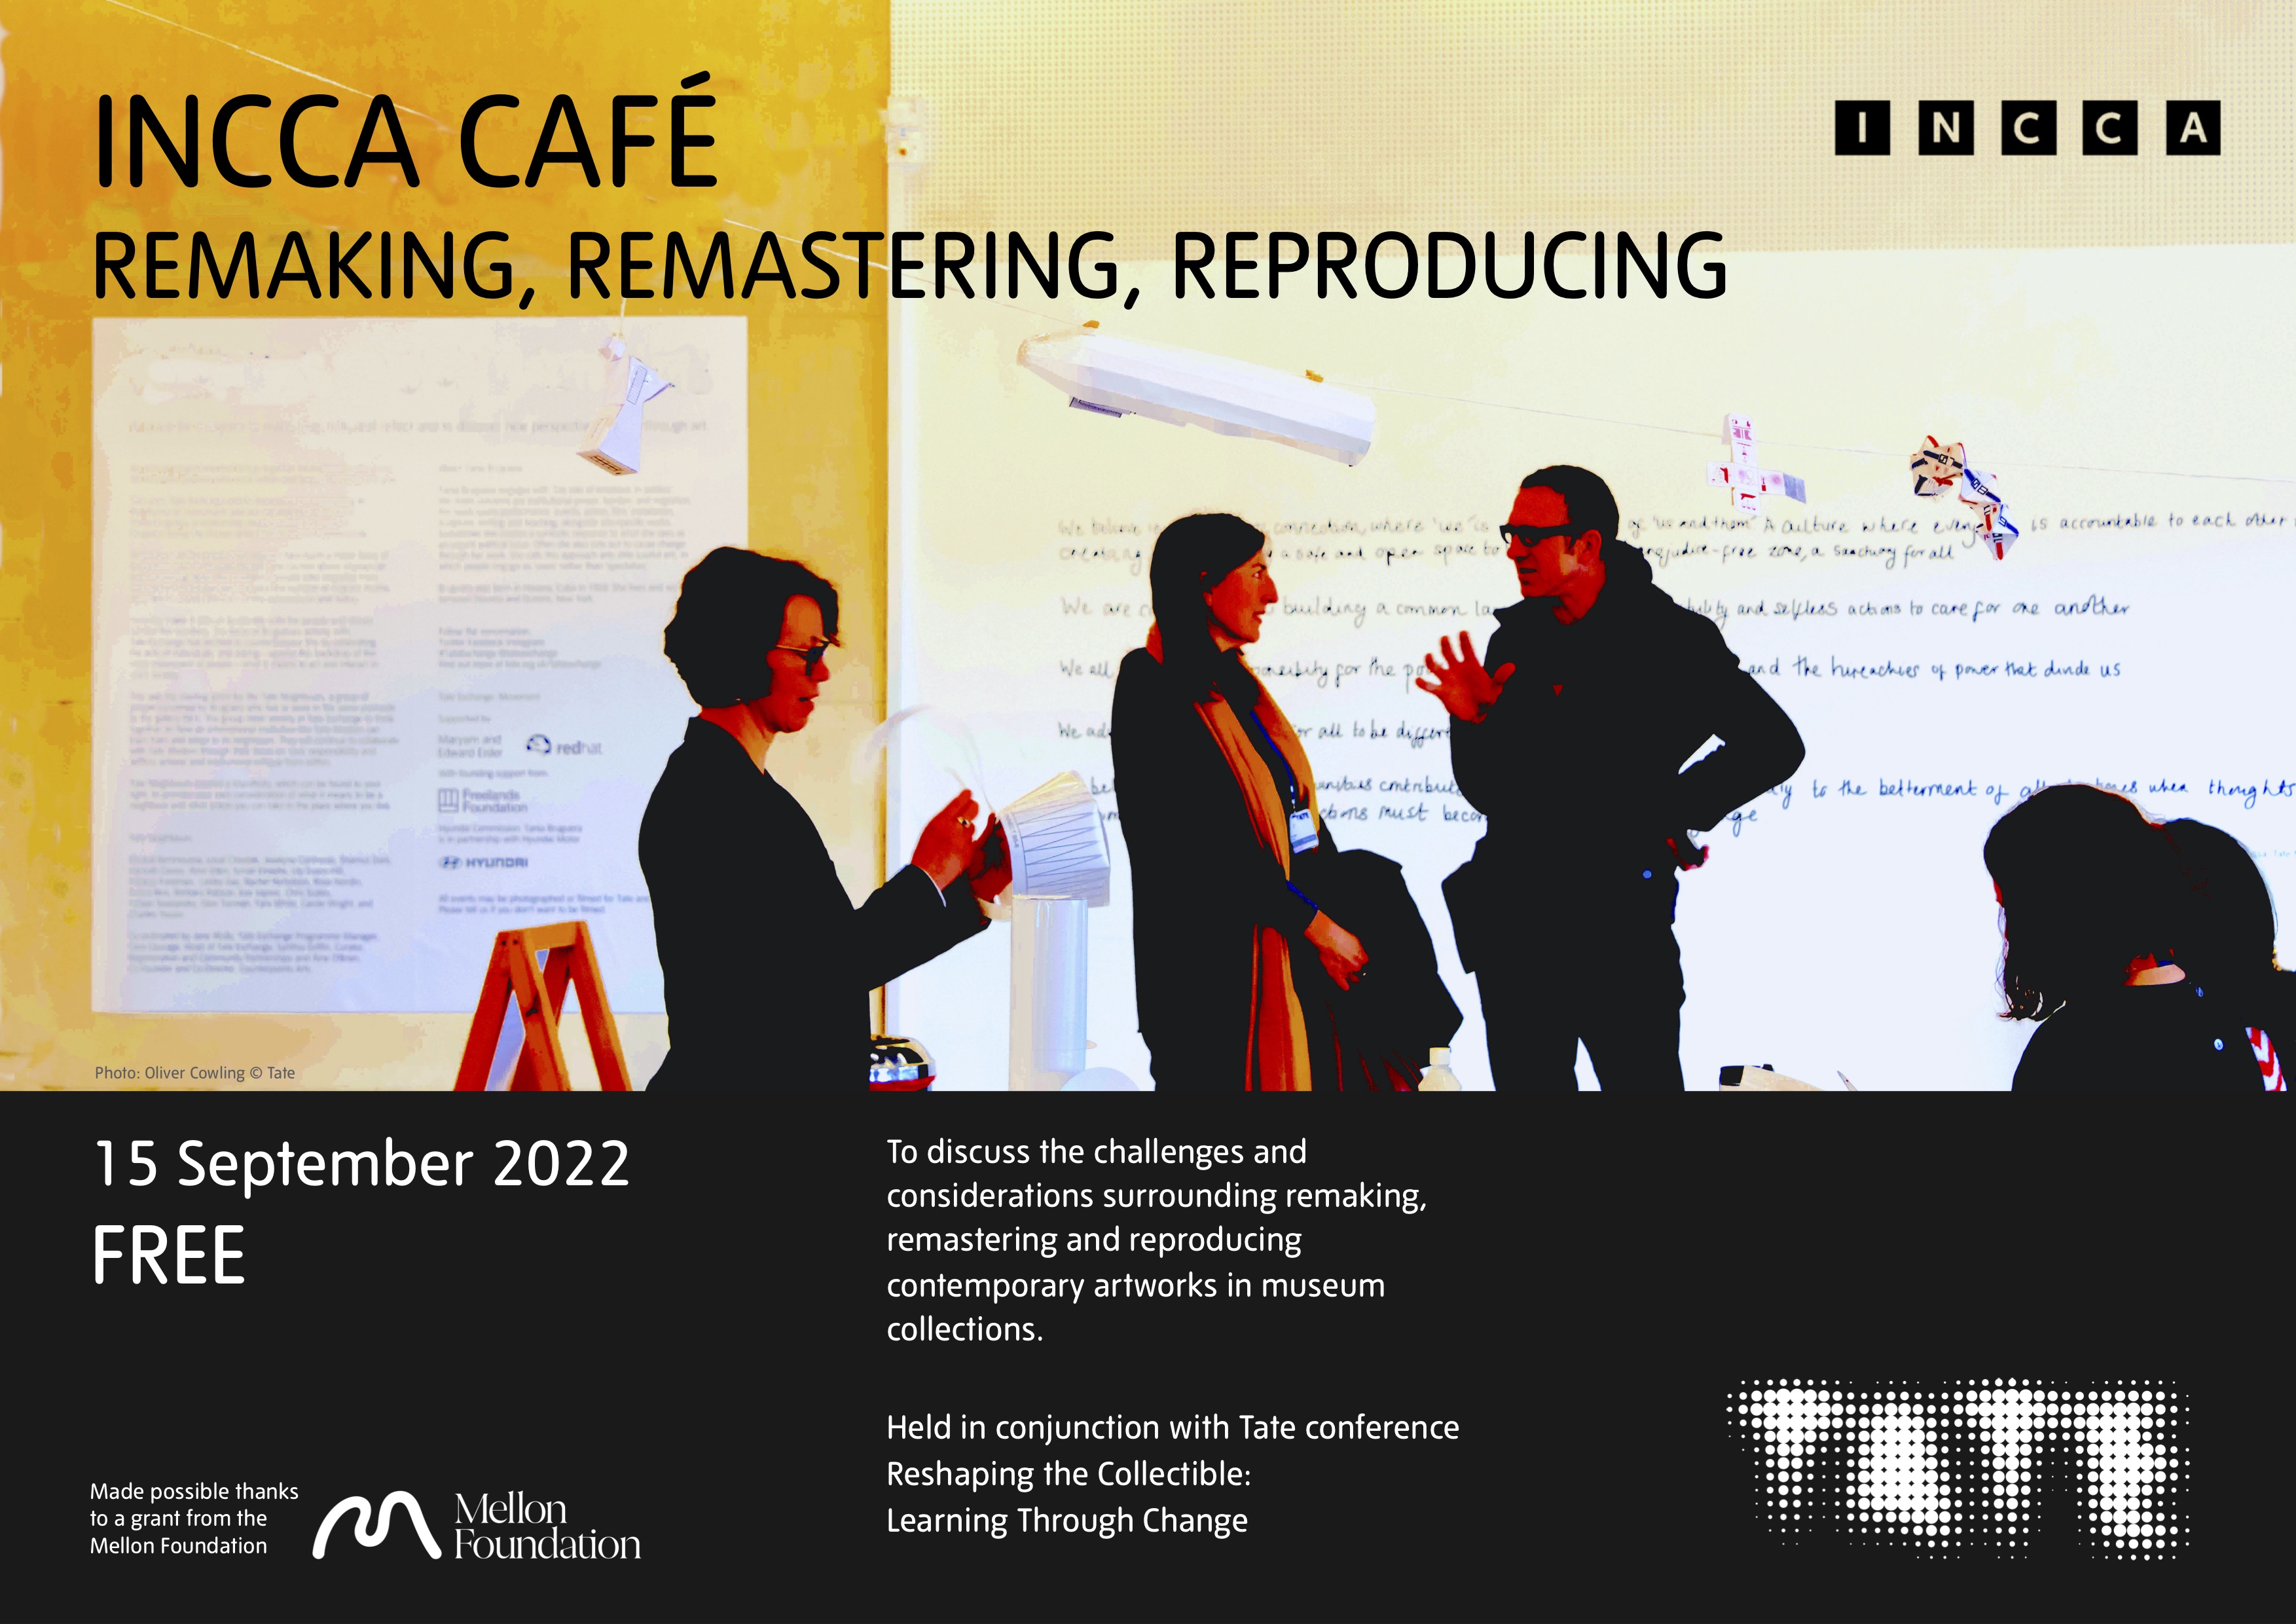 INCCA Café with Tate, London: Remaking, Remastering, Reproducing